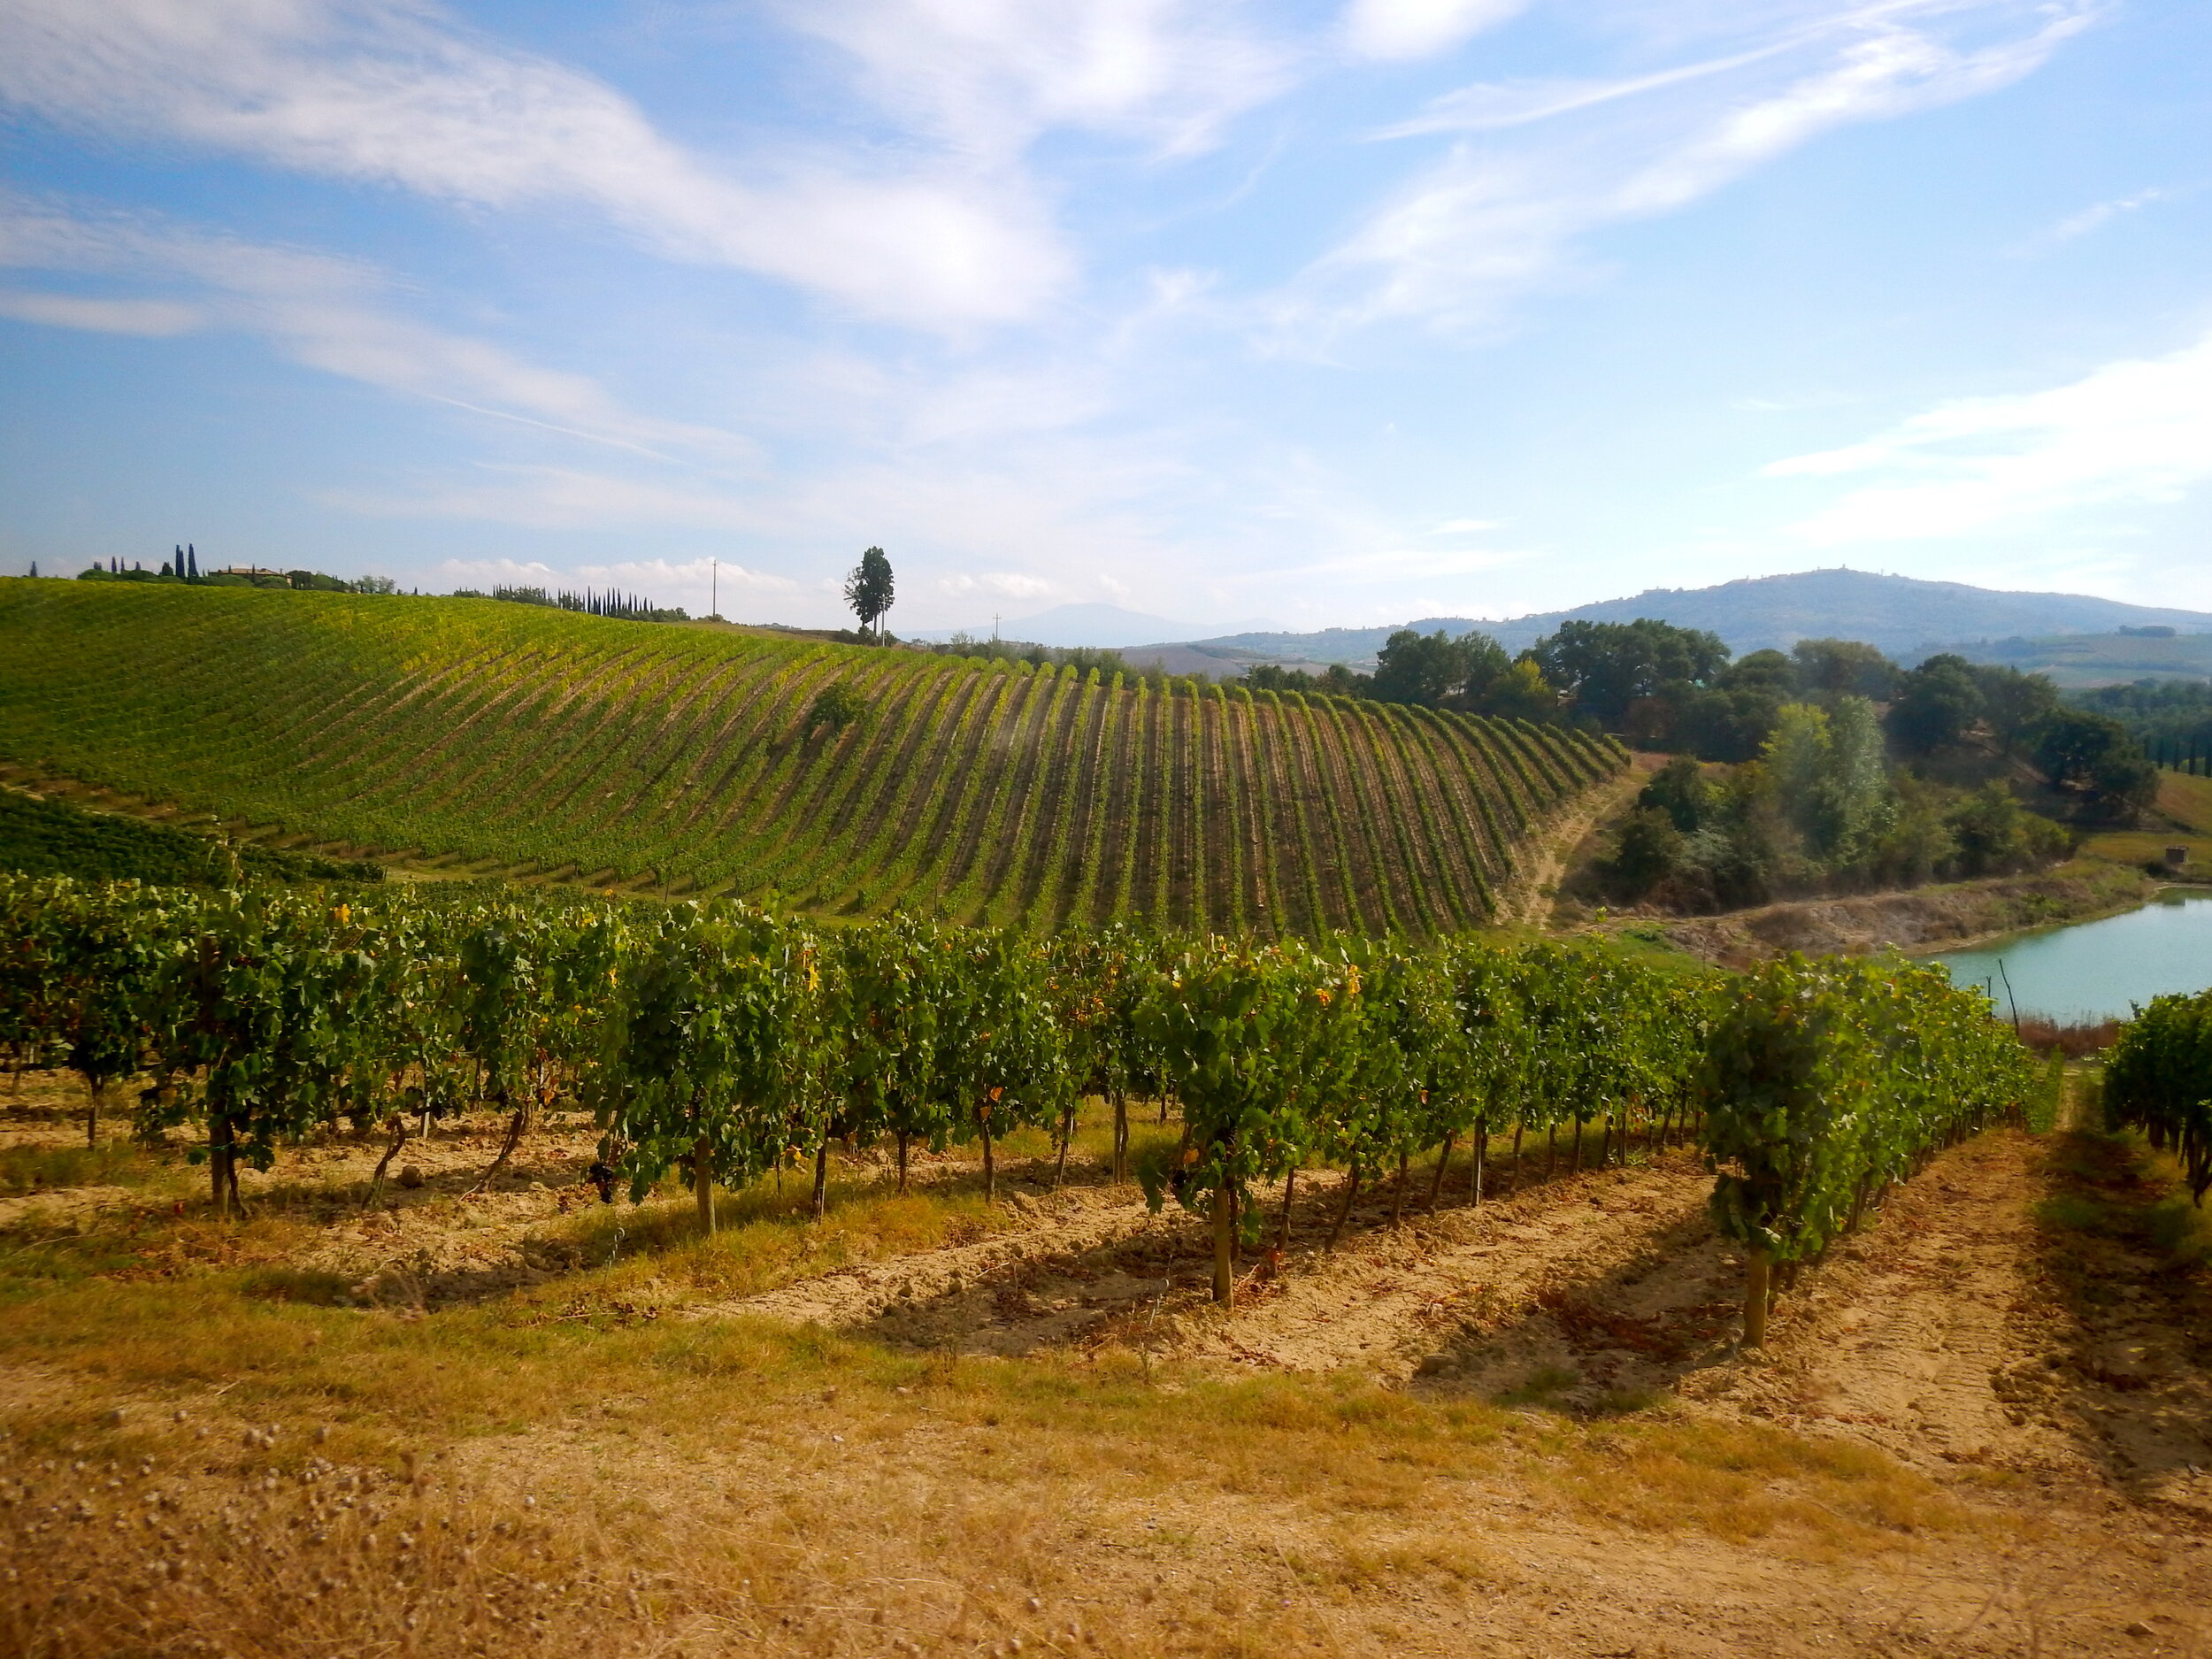  Take a vineyard tour in the Tuscan countryside 